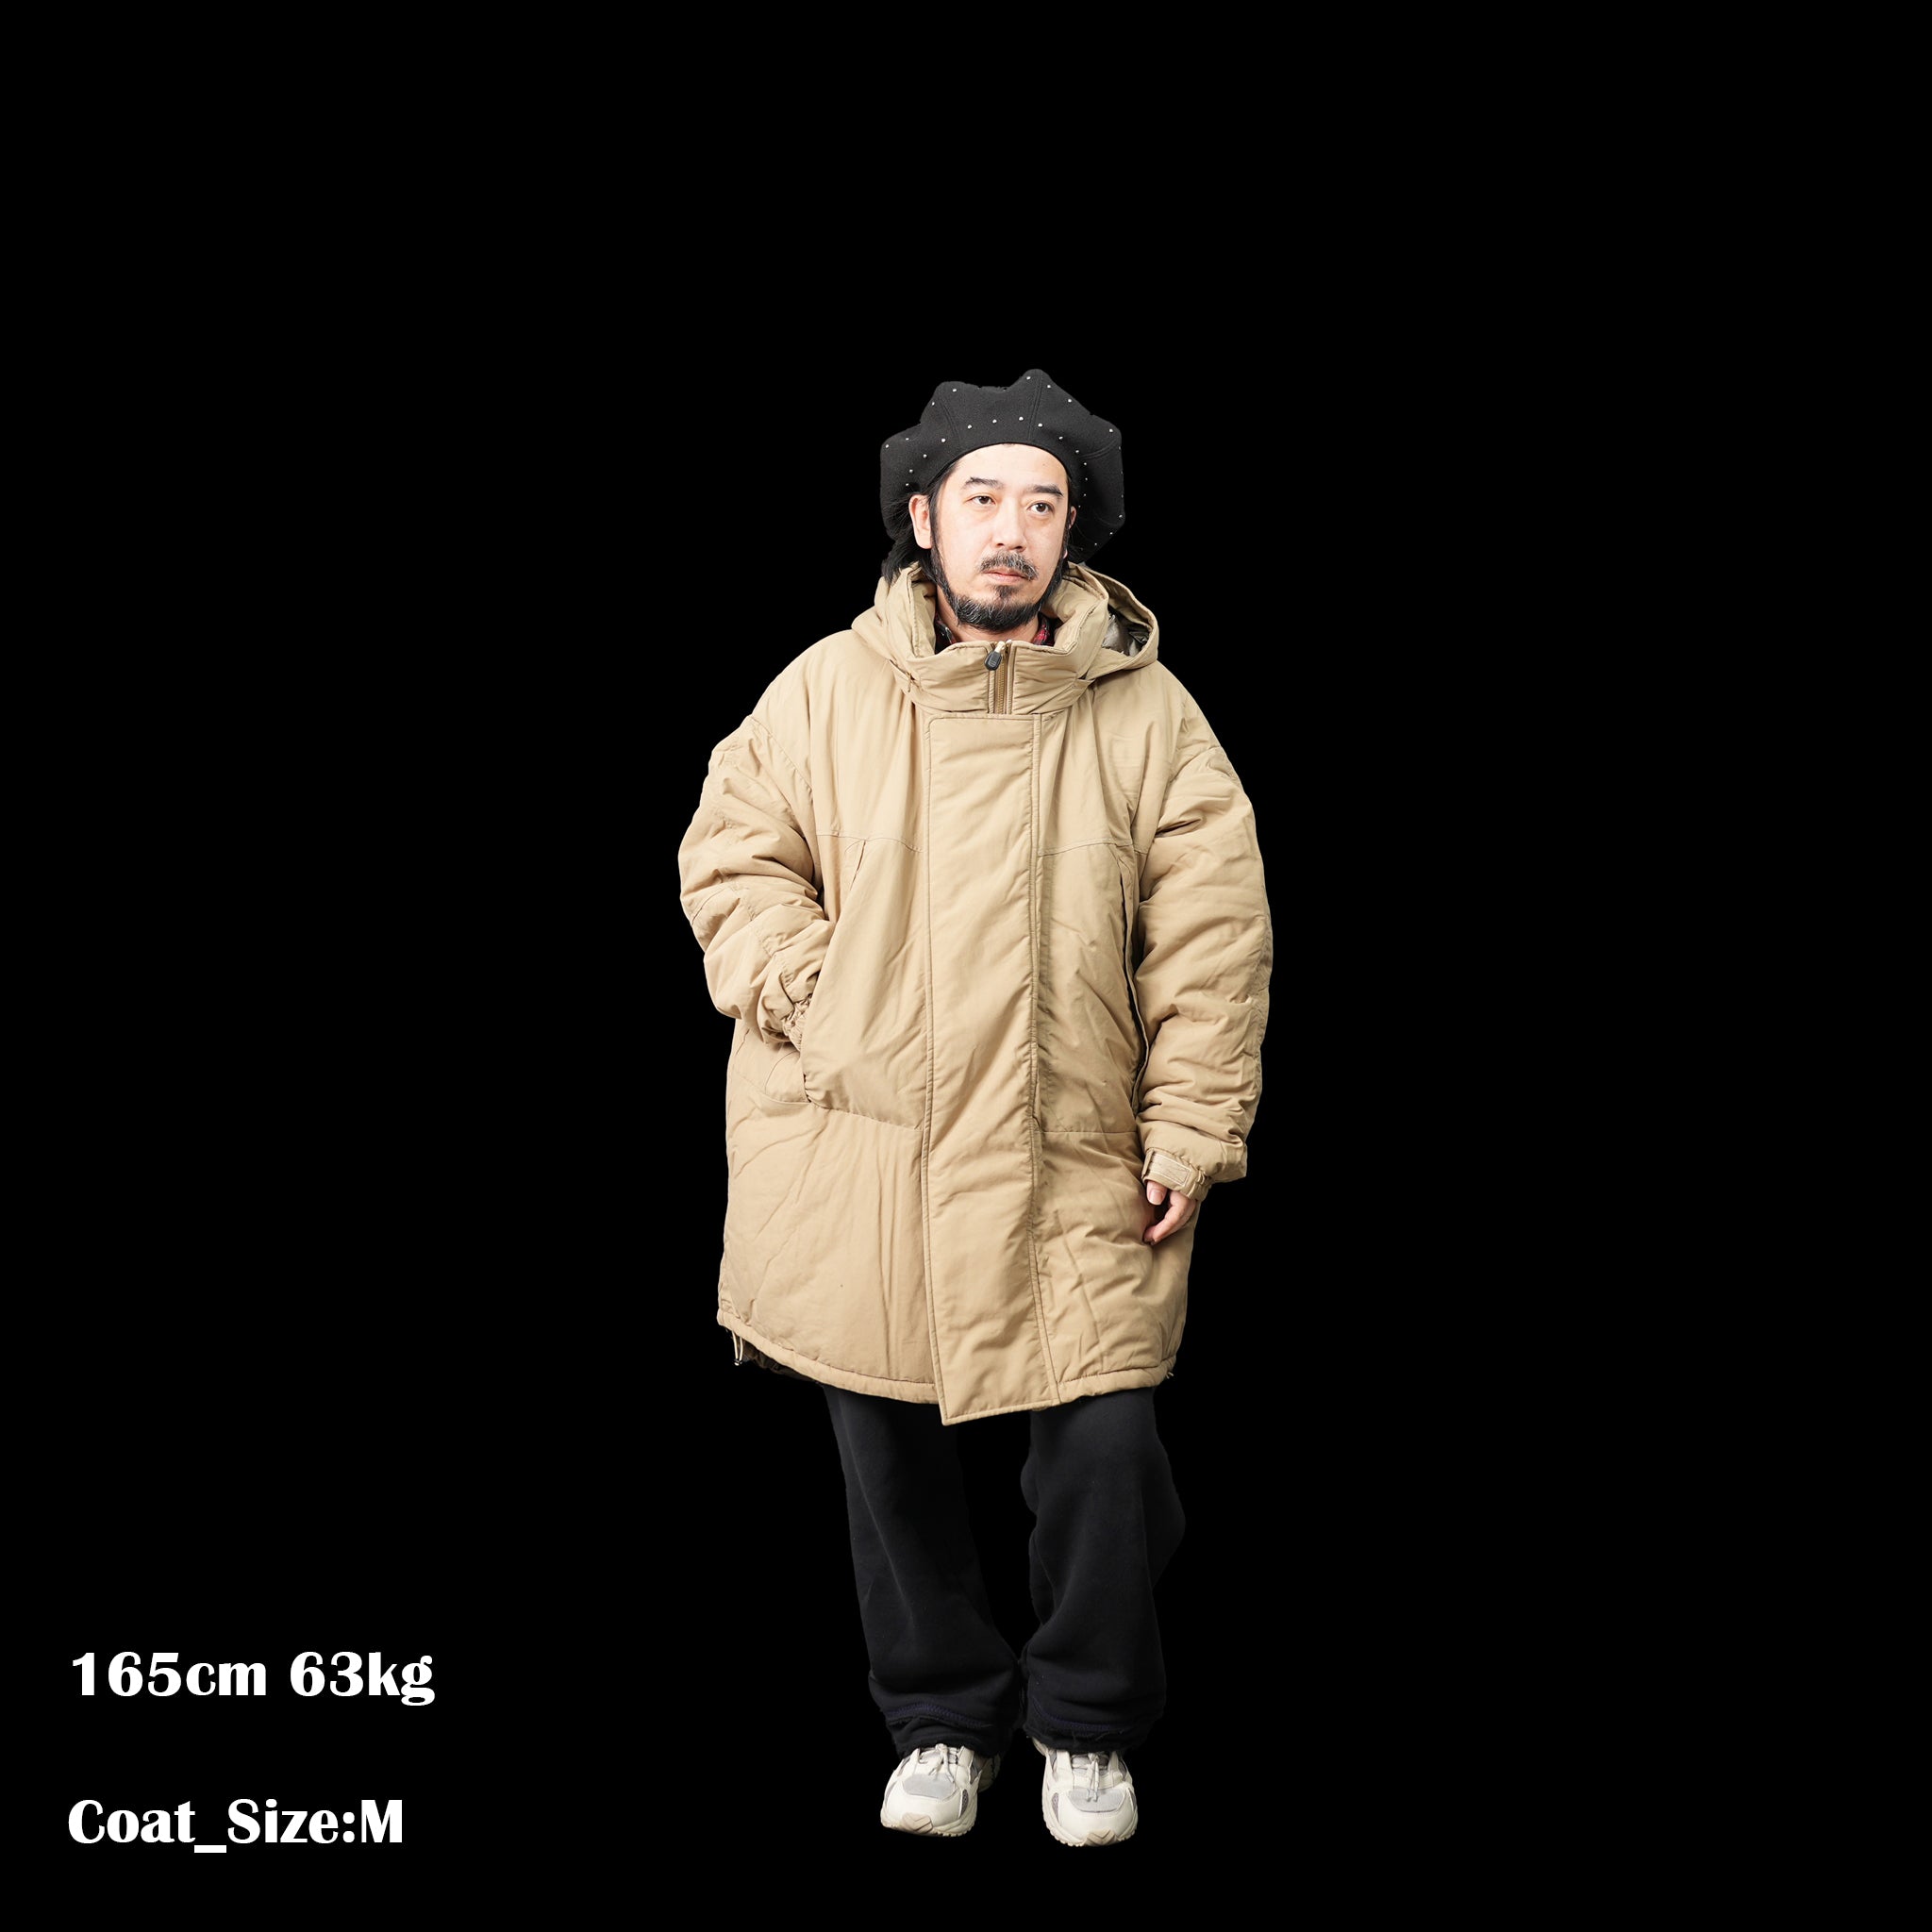 No:ms21f010a | Name:level7 type2 monster coat | Color:Black/Coyote【MADE IN STANDARD_メイドインスタンダード】